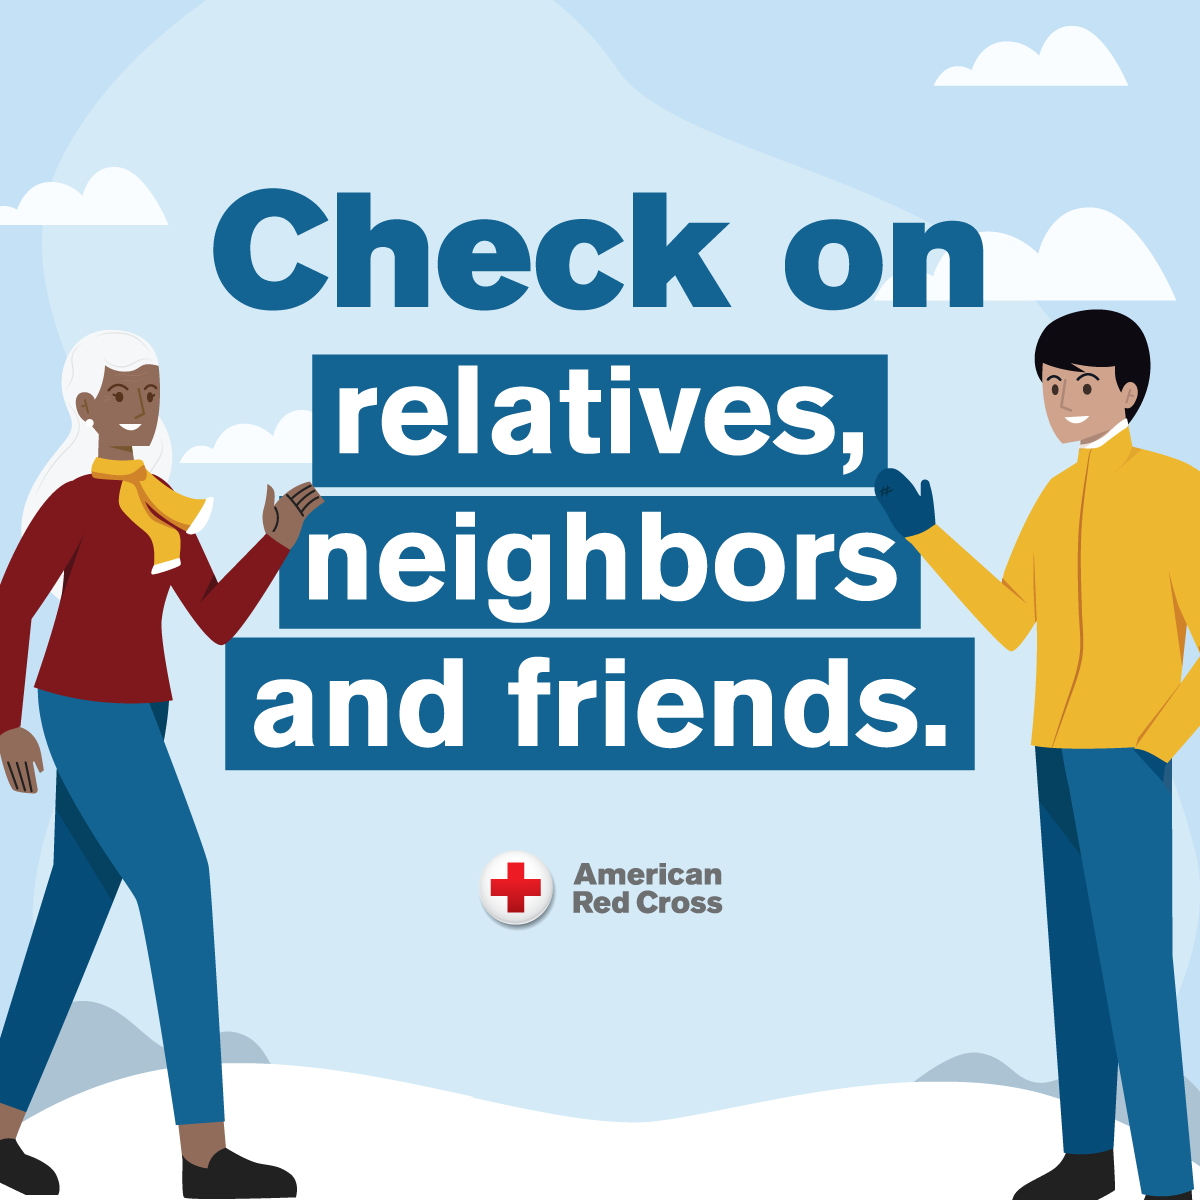 Remember to check on relatives, neighbors and friends